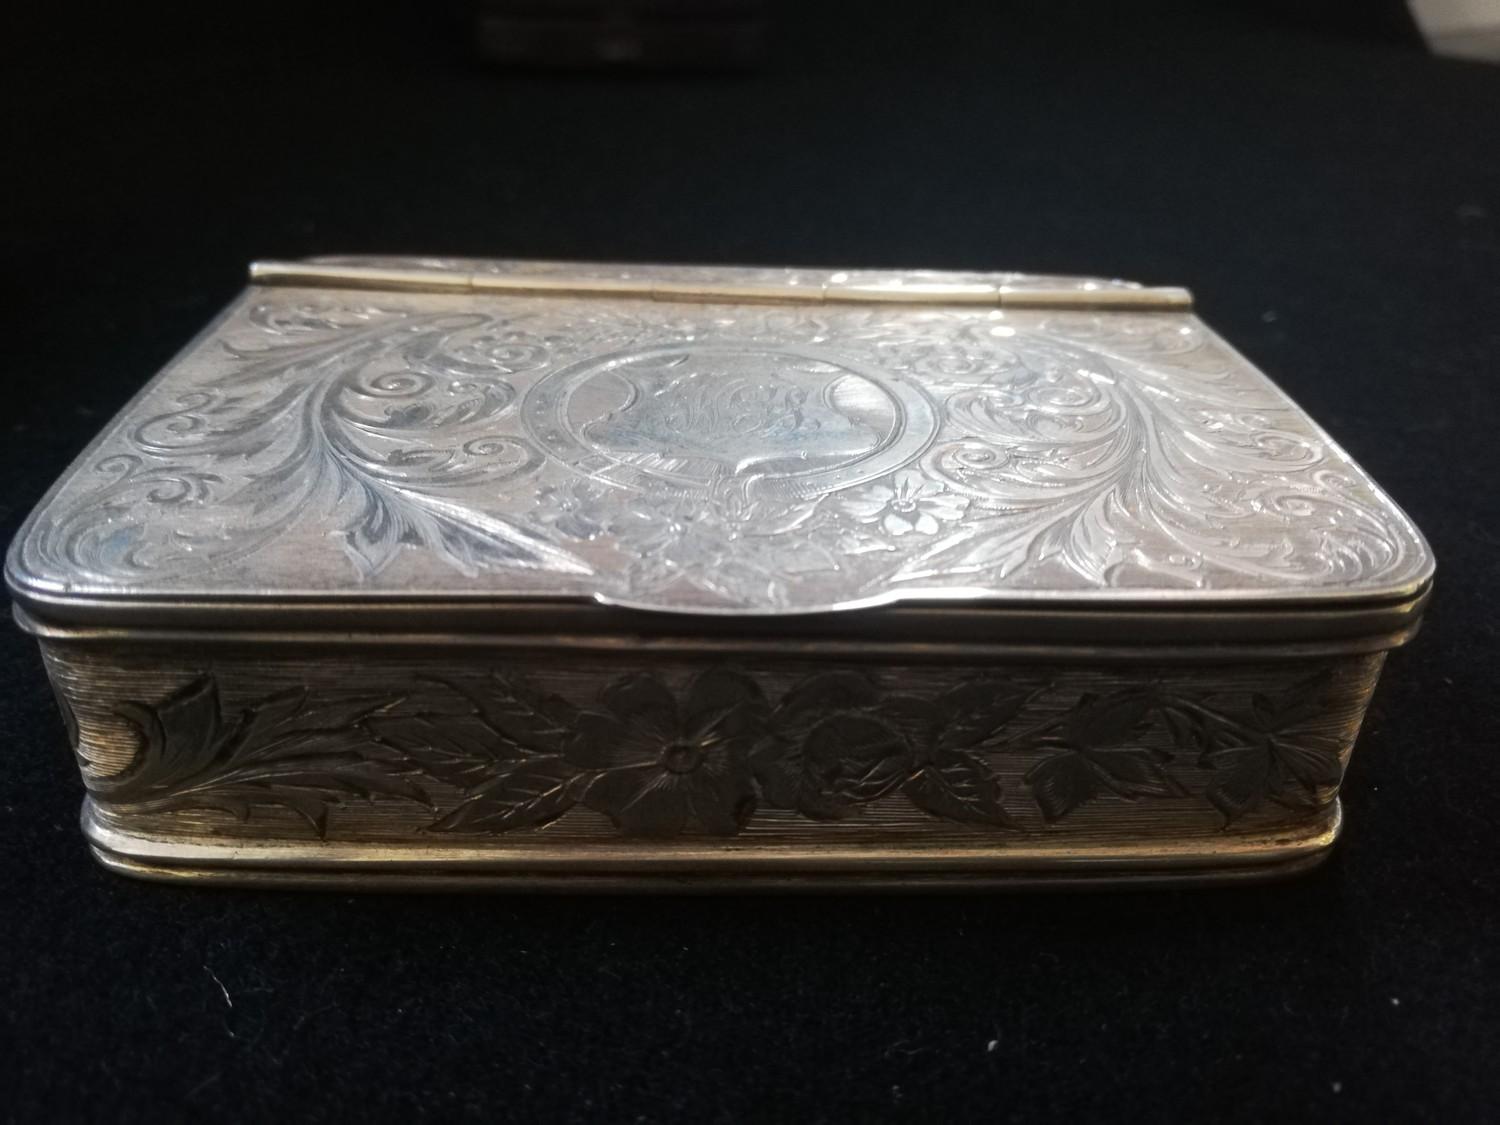 1877 Rare cased pair of Exeter silver hip flask & sandwich box by Josiah Williams & Co - Image 3 of 7